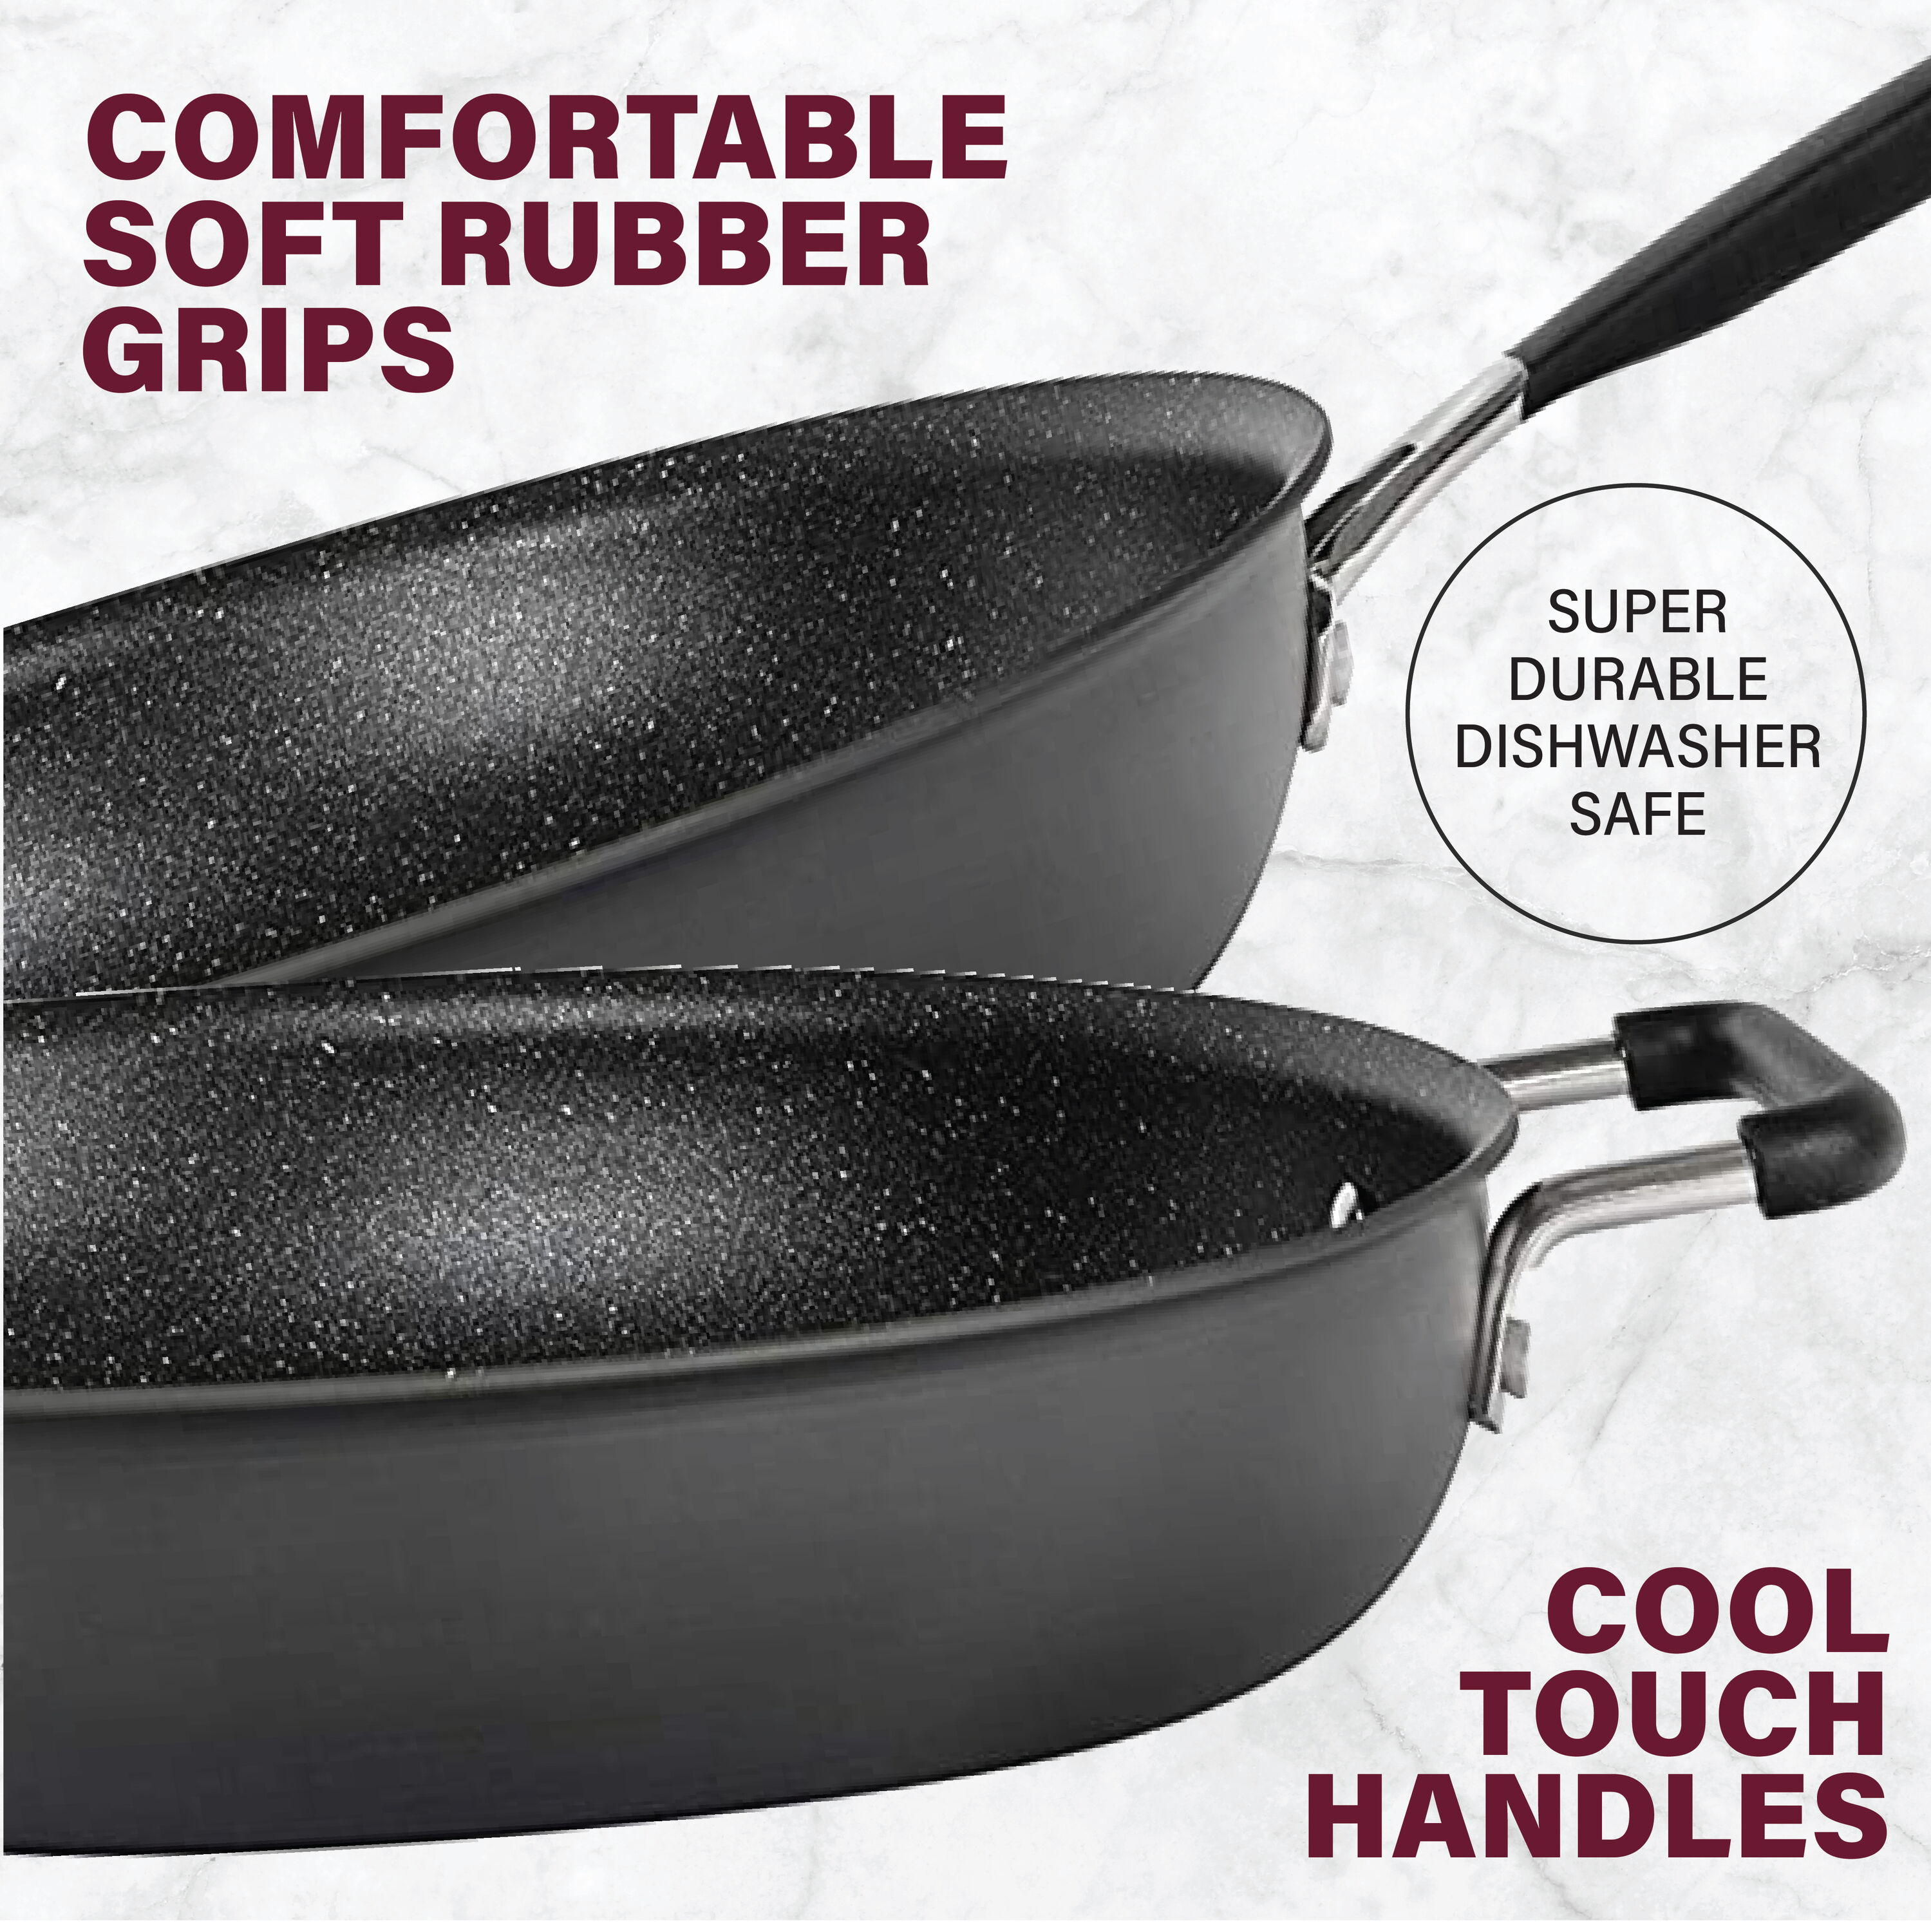 GRANITESTONE Orignal Super Non-stick and Scratchproof, No-warp, Oven-Safe  and Dishwasher Safe, Mineral-enforced Frying Pans With Stay-Cool Handles